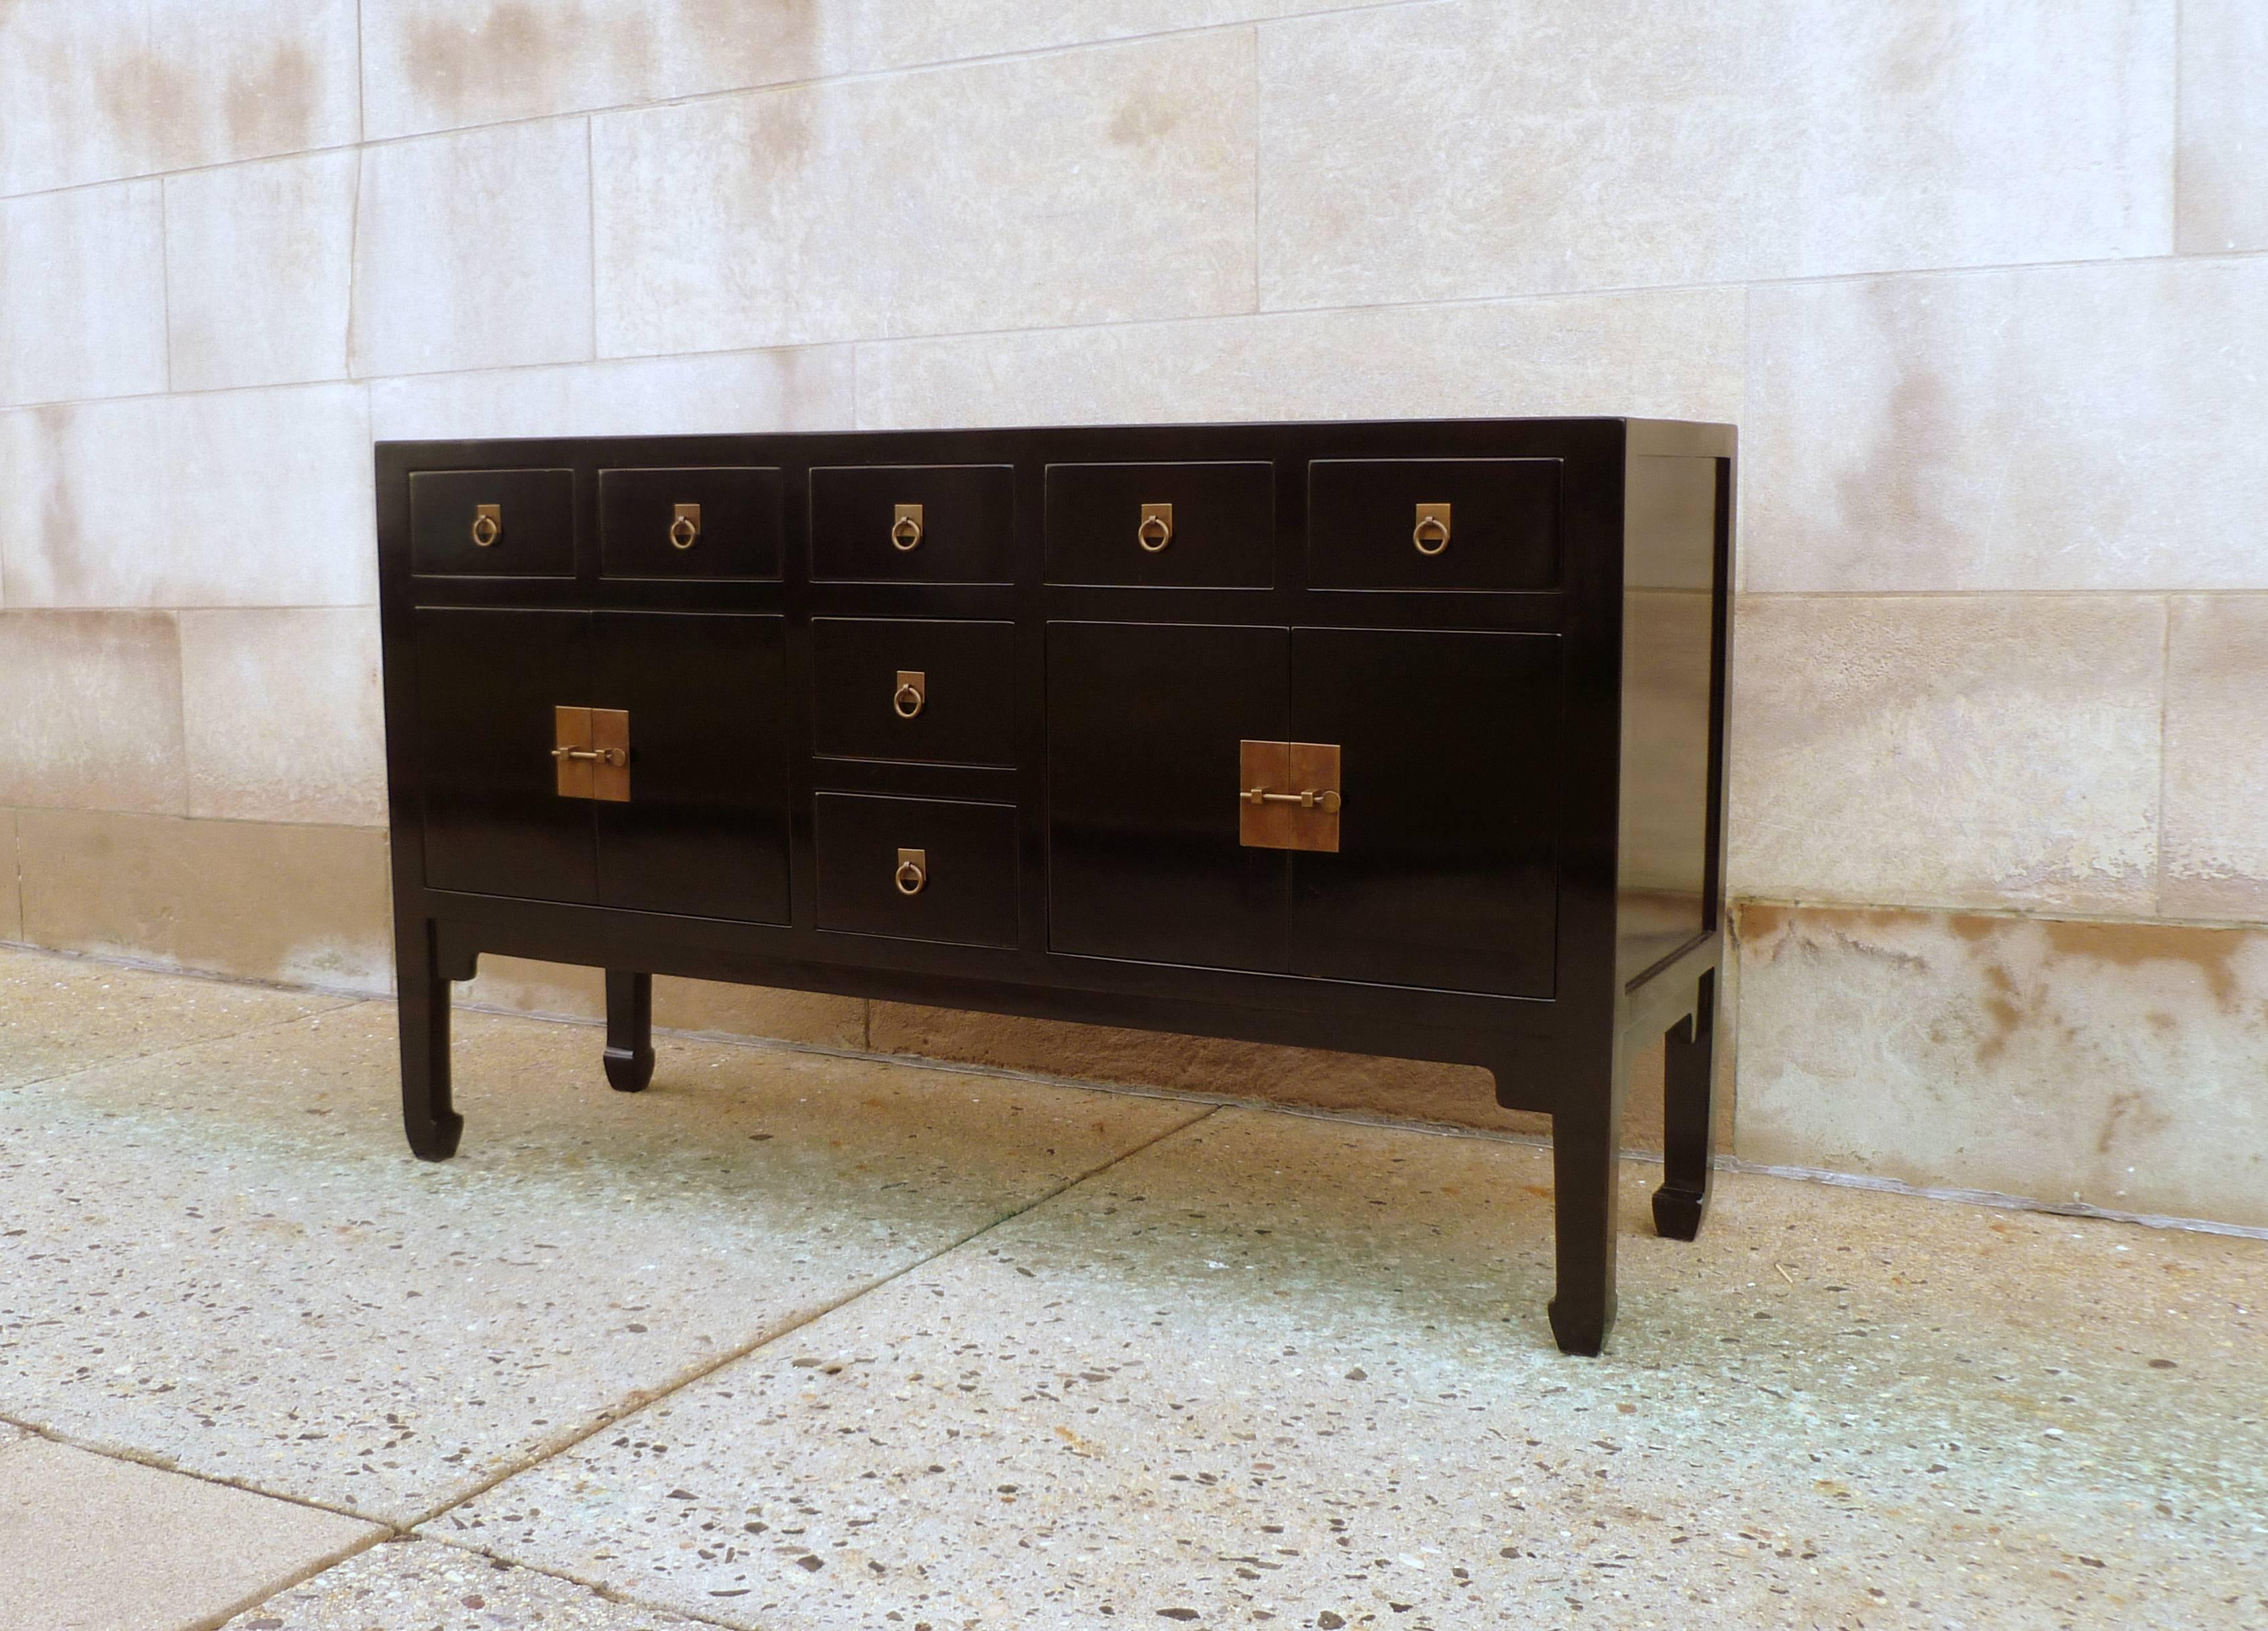 Polished Fine Black Lacquer Sideboard with Drawers